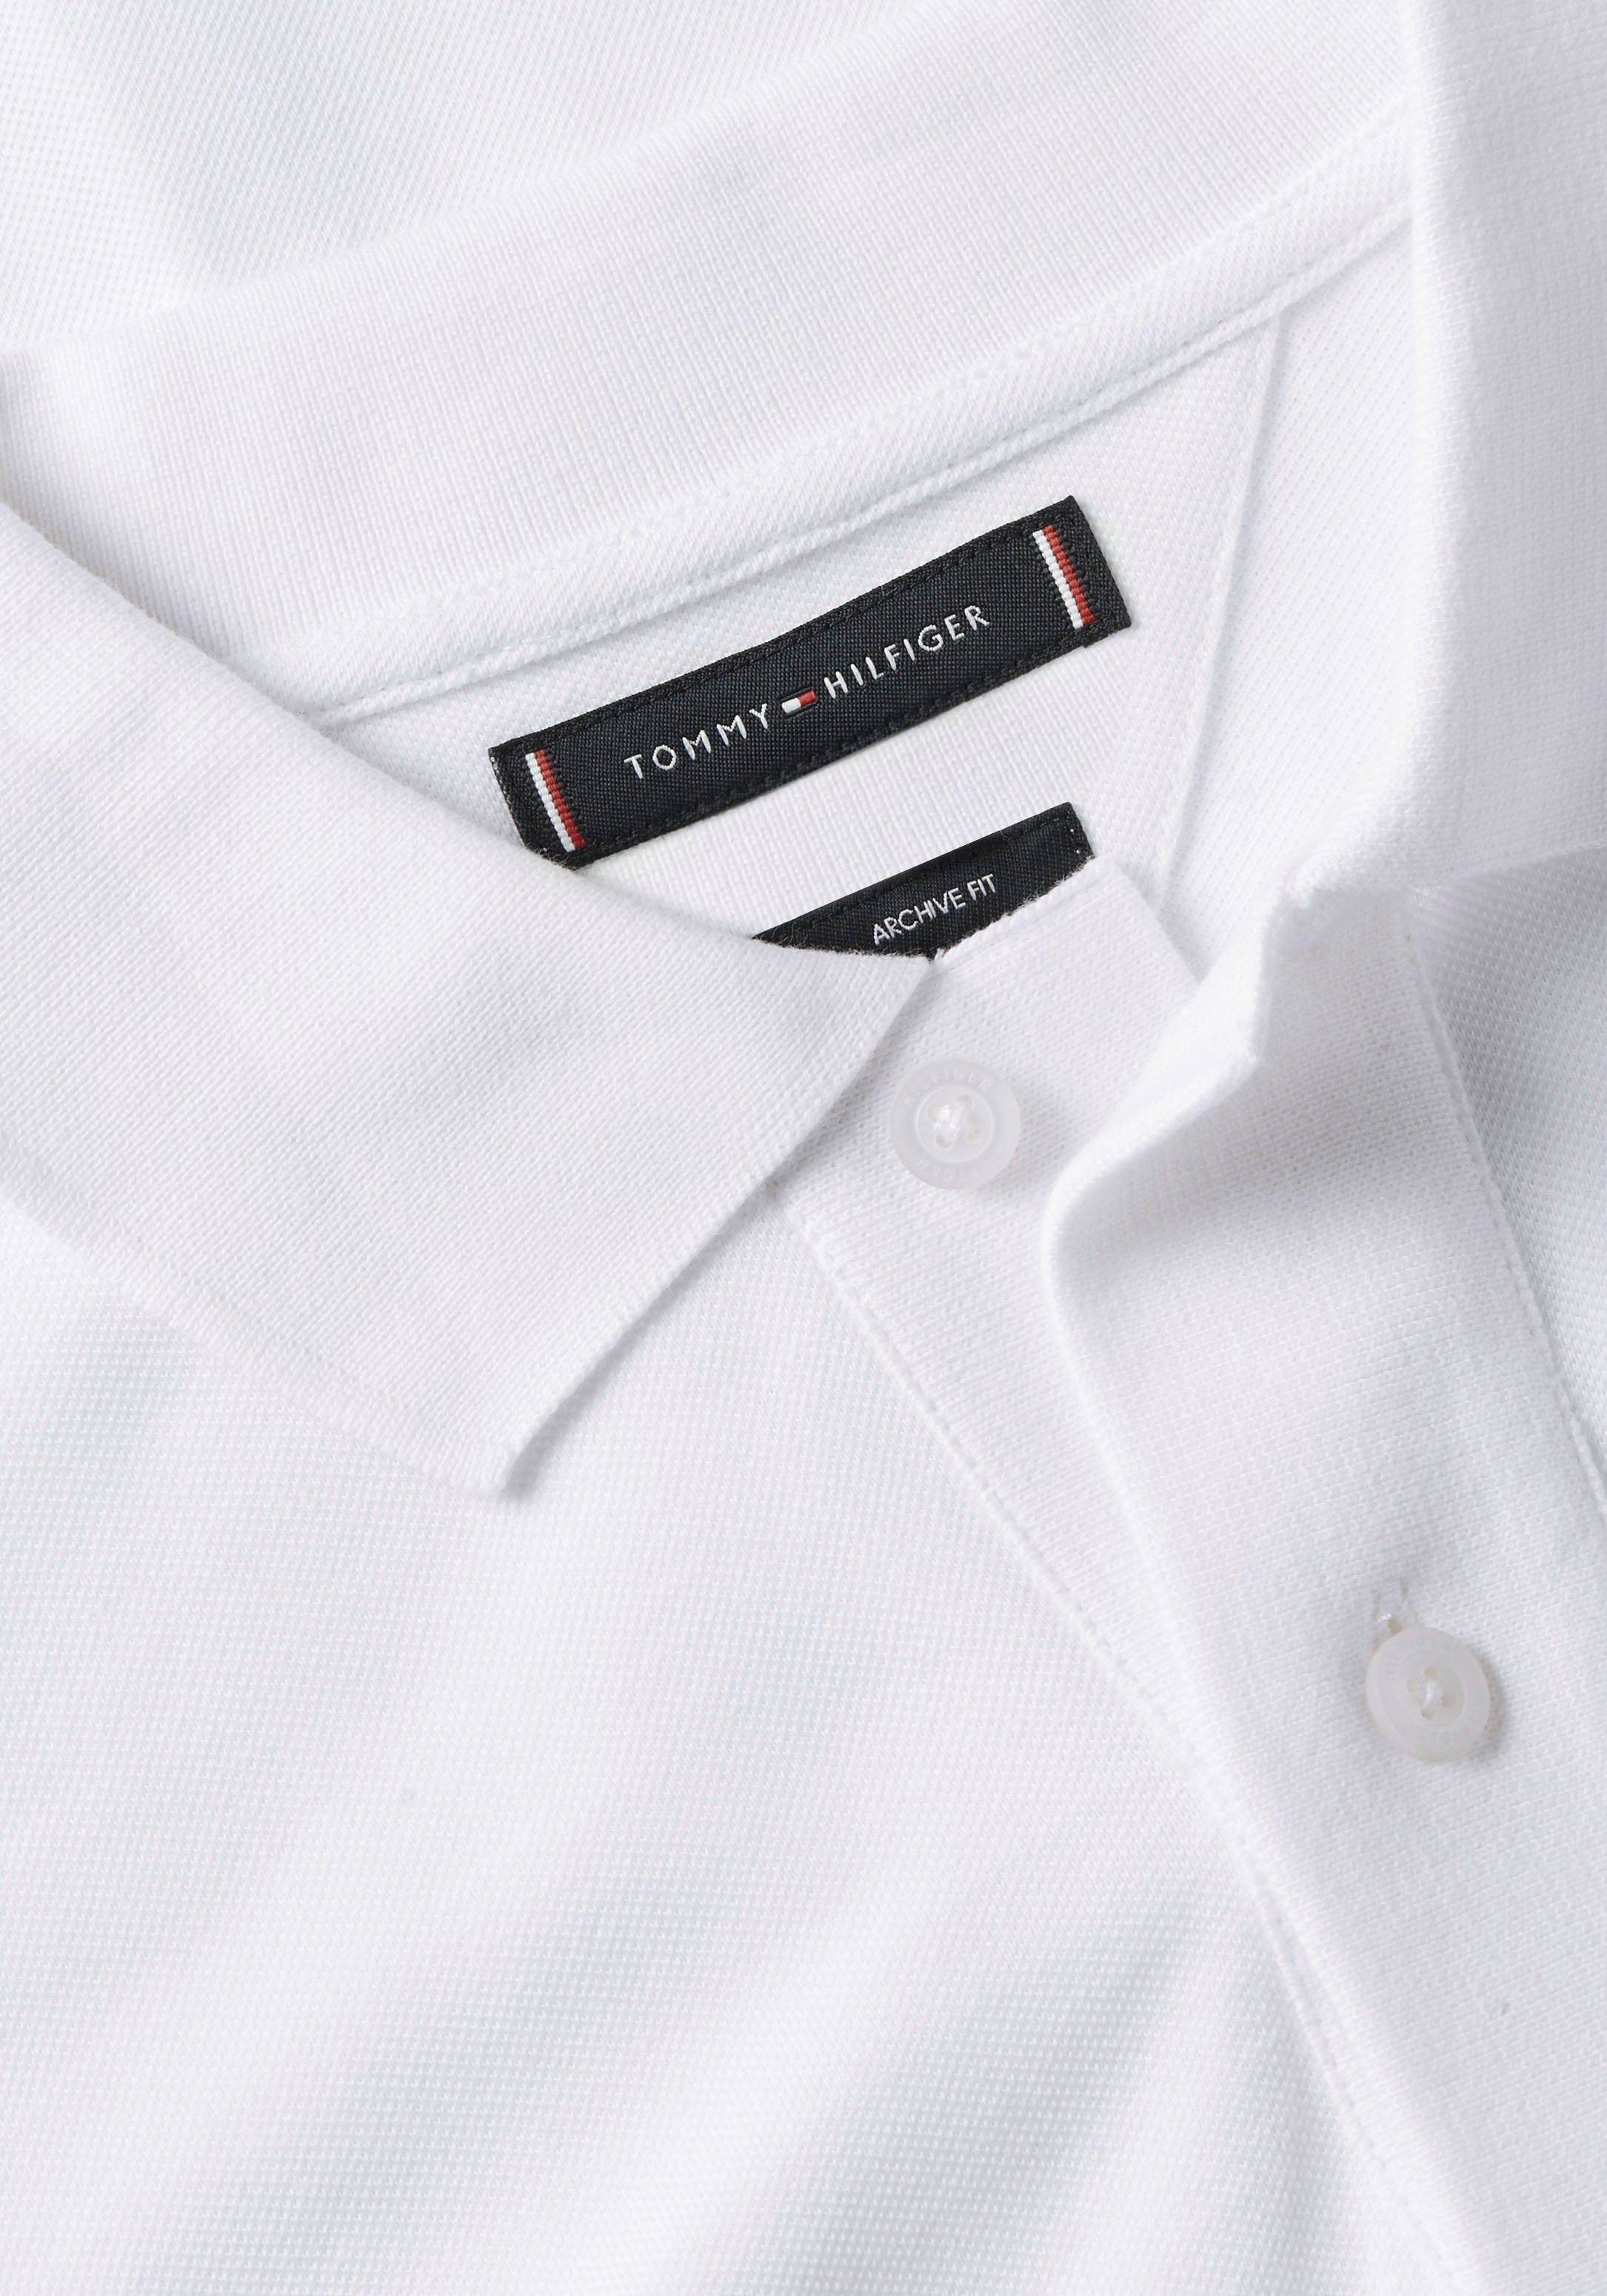 MONOTYPE White Poloshirt Hilfiger Tommy ARCHIVE POLO STRUC